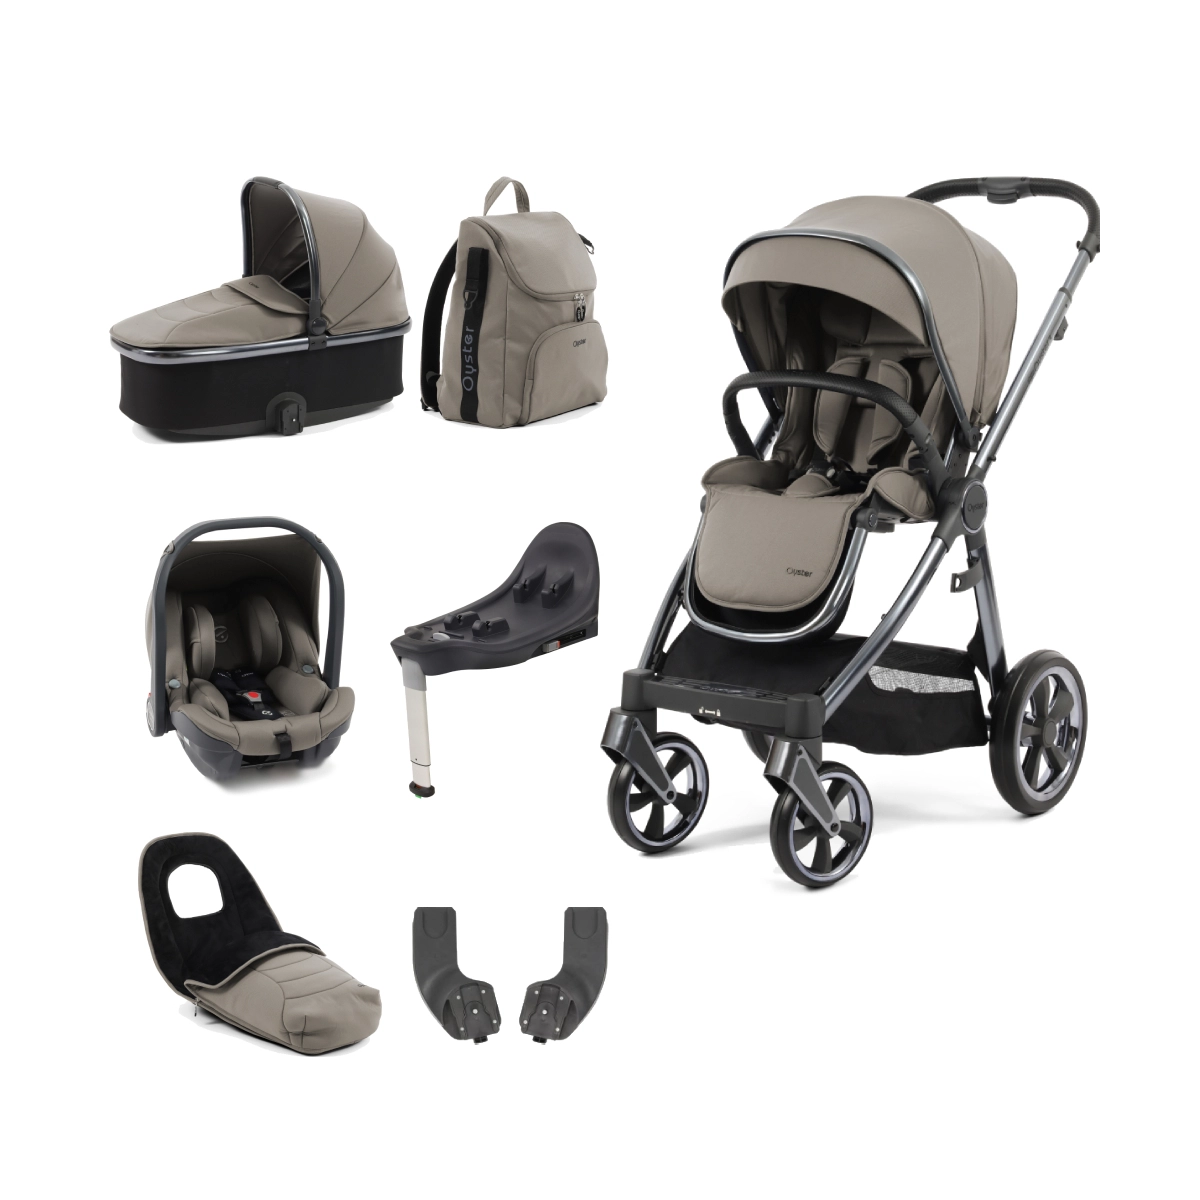 BabyStyle Oyster 3 Gun Metal Chassis 7 Piece Luxury Travel System